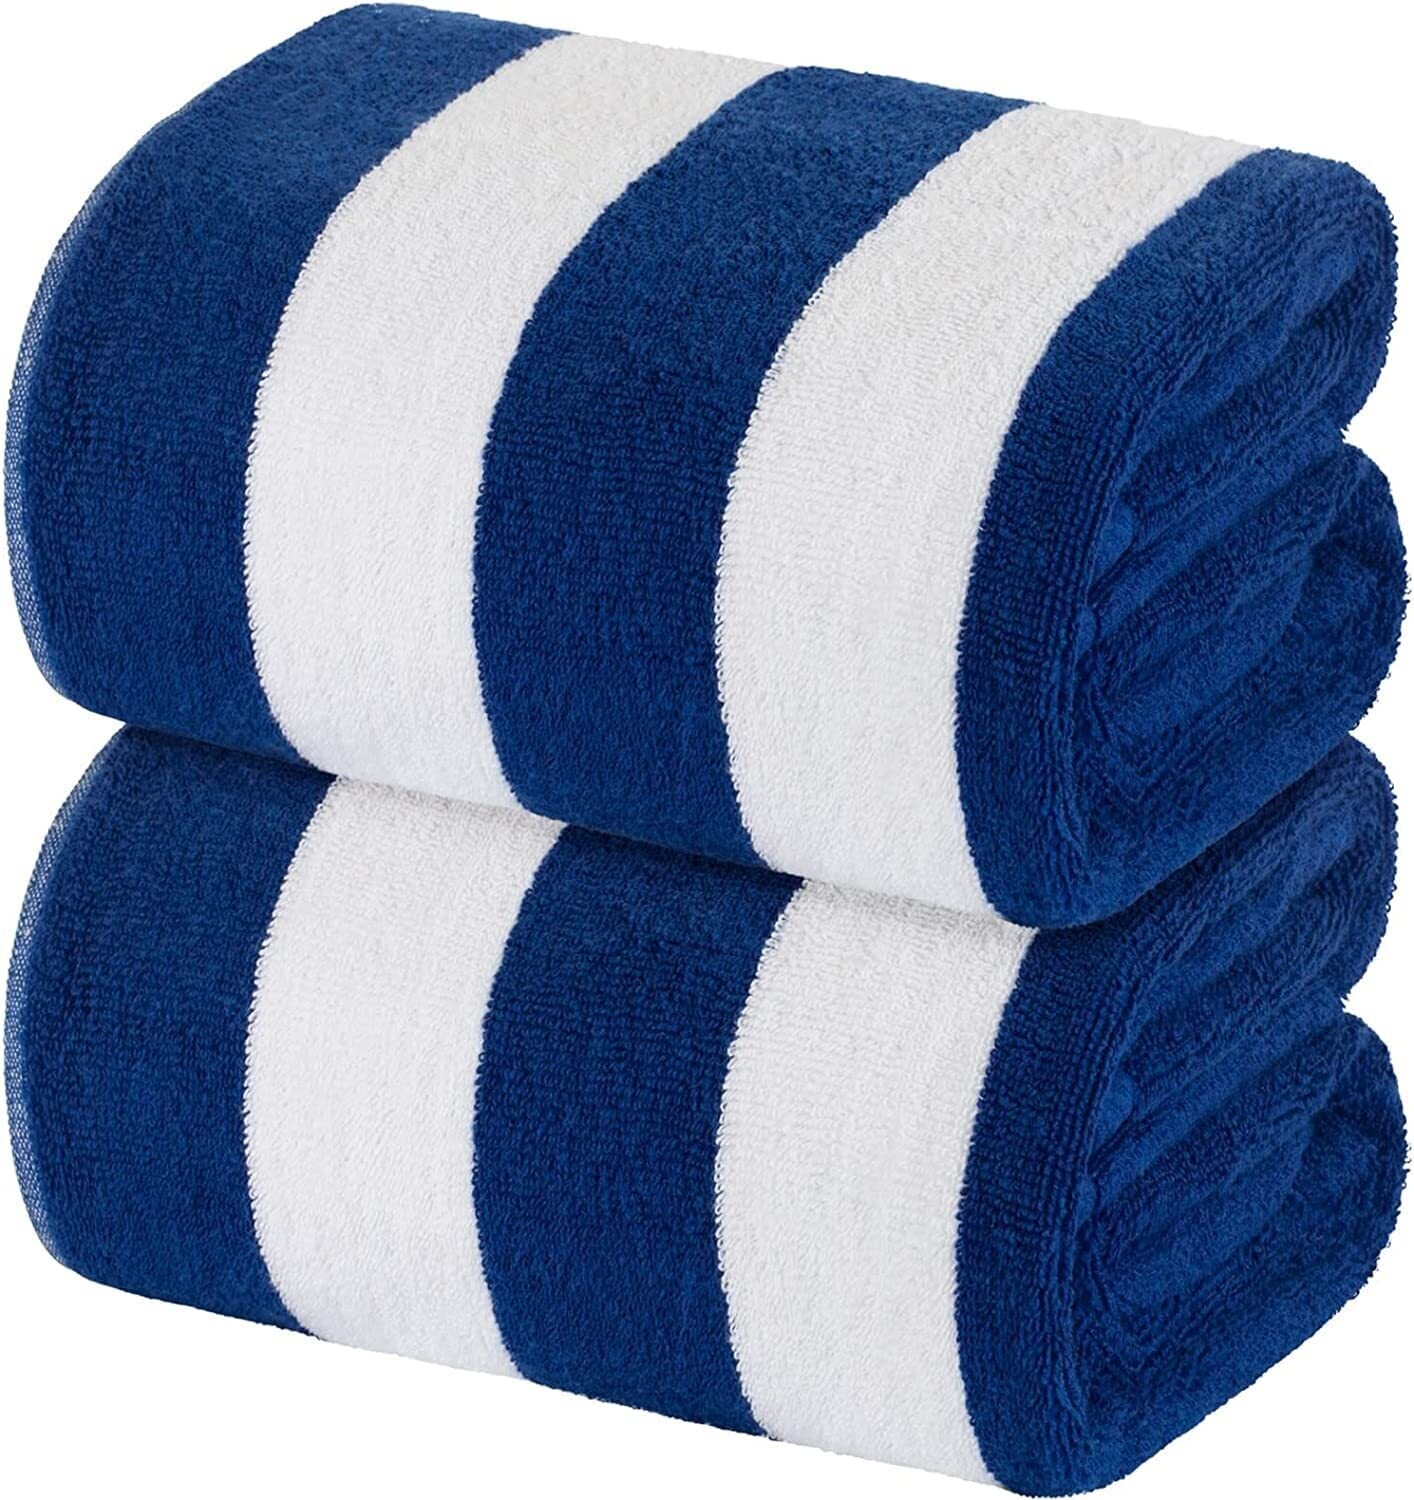 Pool Towel Striped Blue/White 90x180cm - Large Cotton Beach Towel, Perfect for Holidays